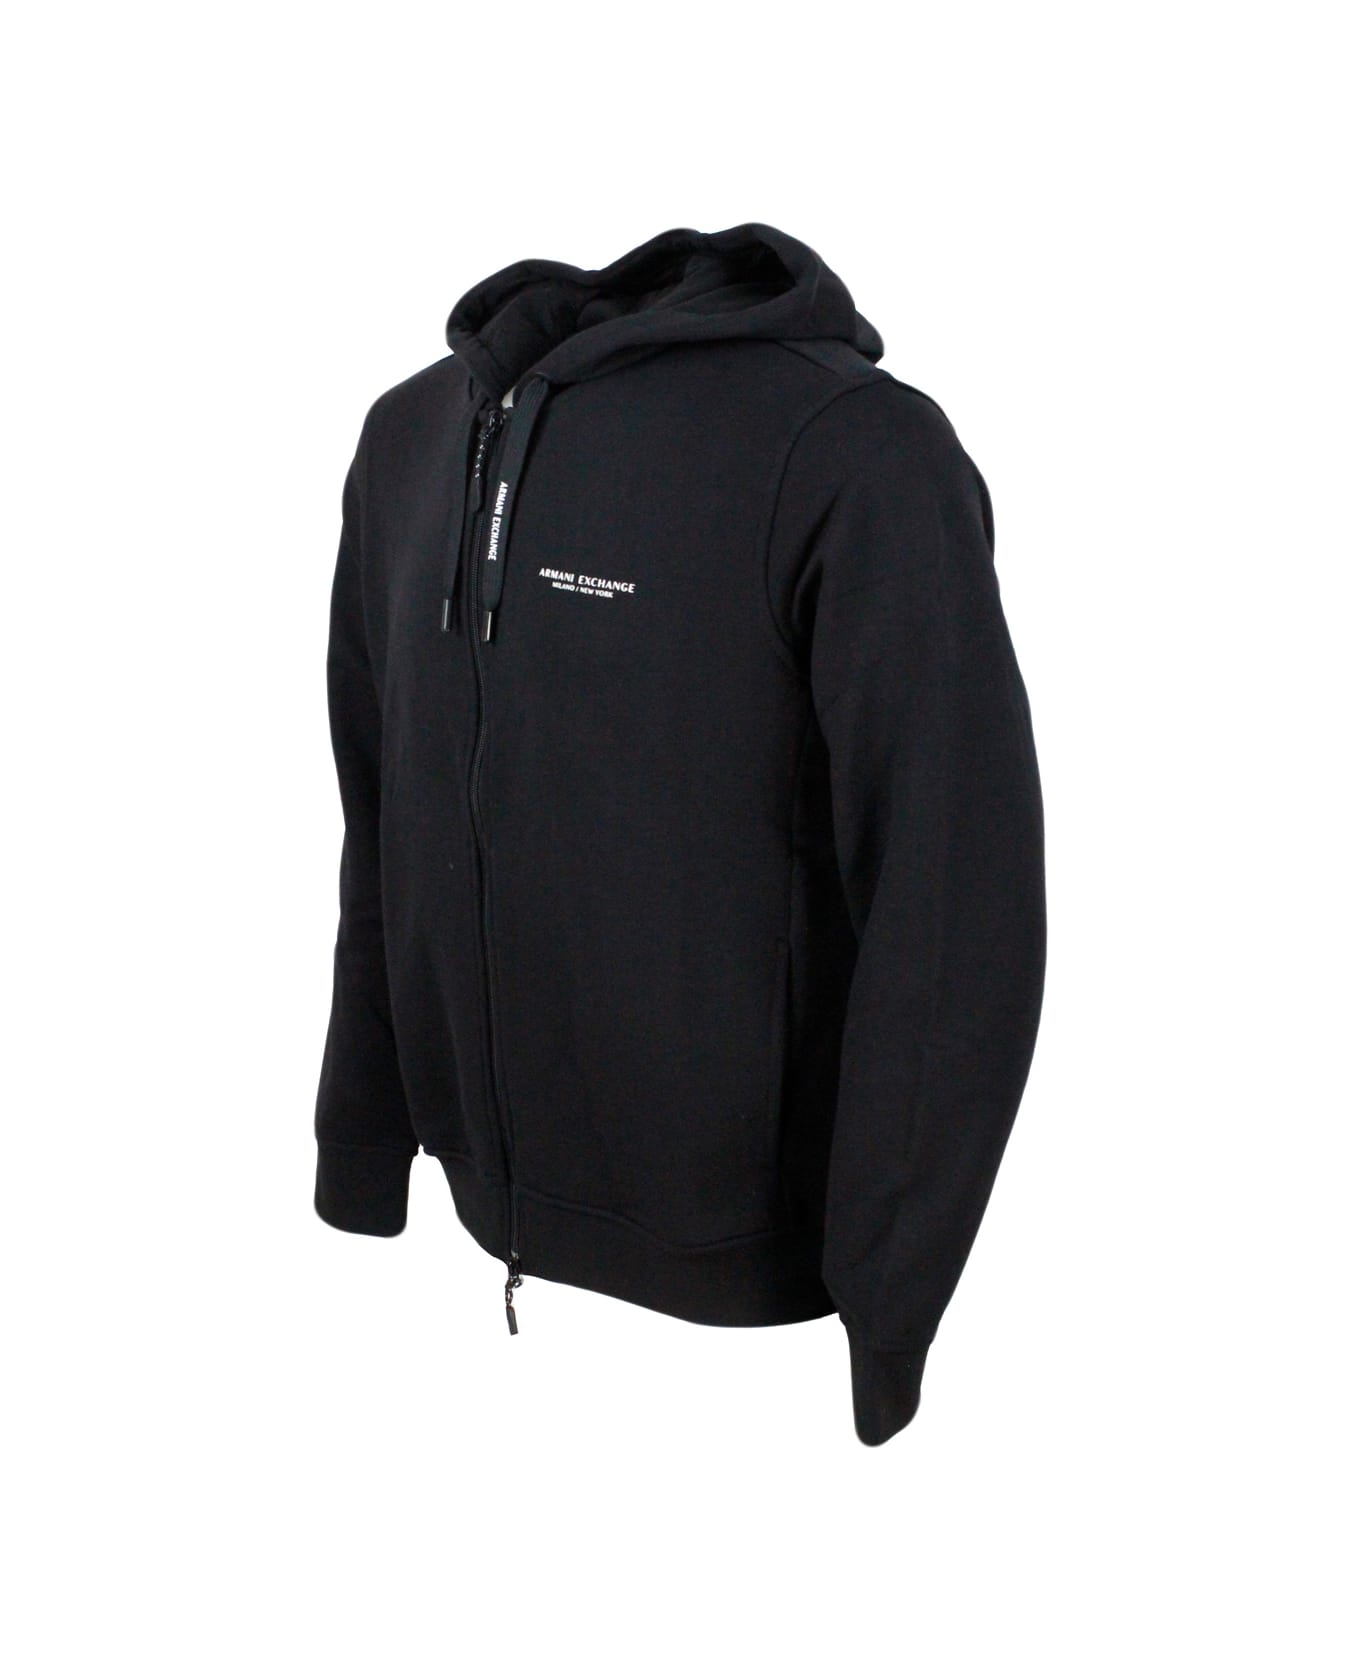 Armani Collezioni Long-sleeved Full Zip Drawstring Hoodie With Small Logo On The Chest - Black ニットウェア